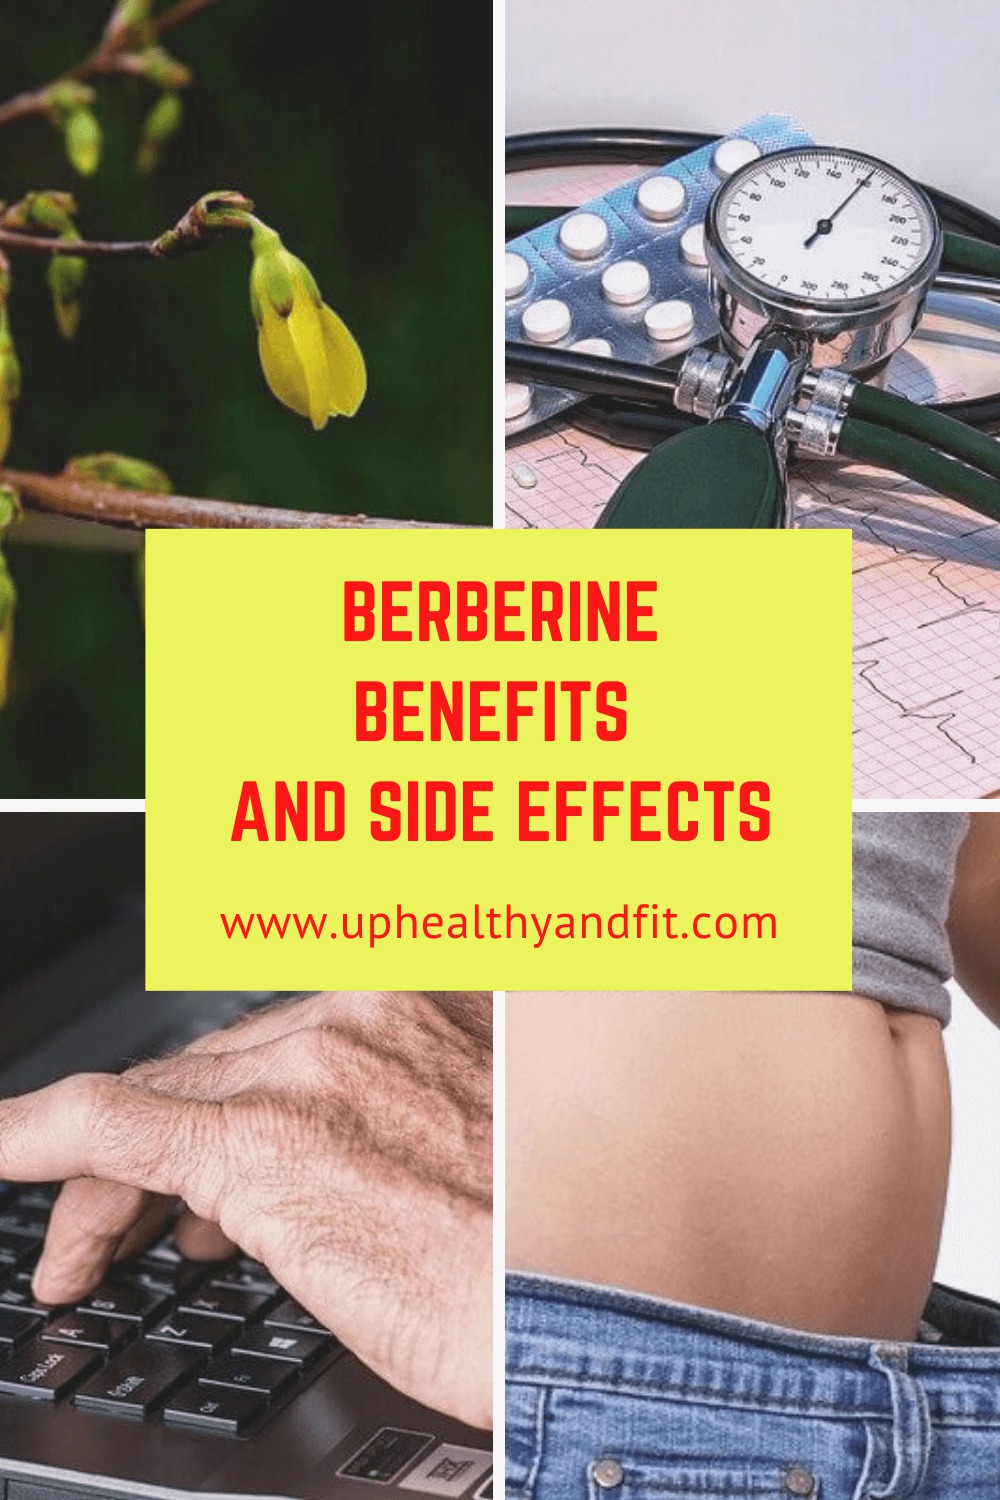 Berberine-benefits-and-side effects